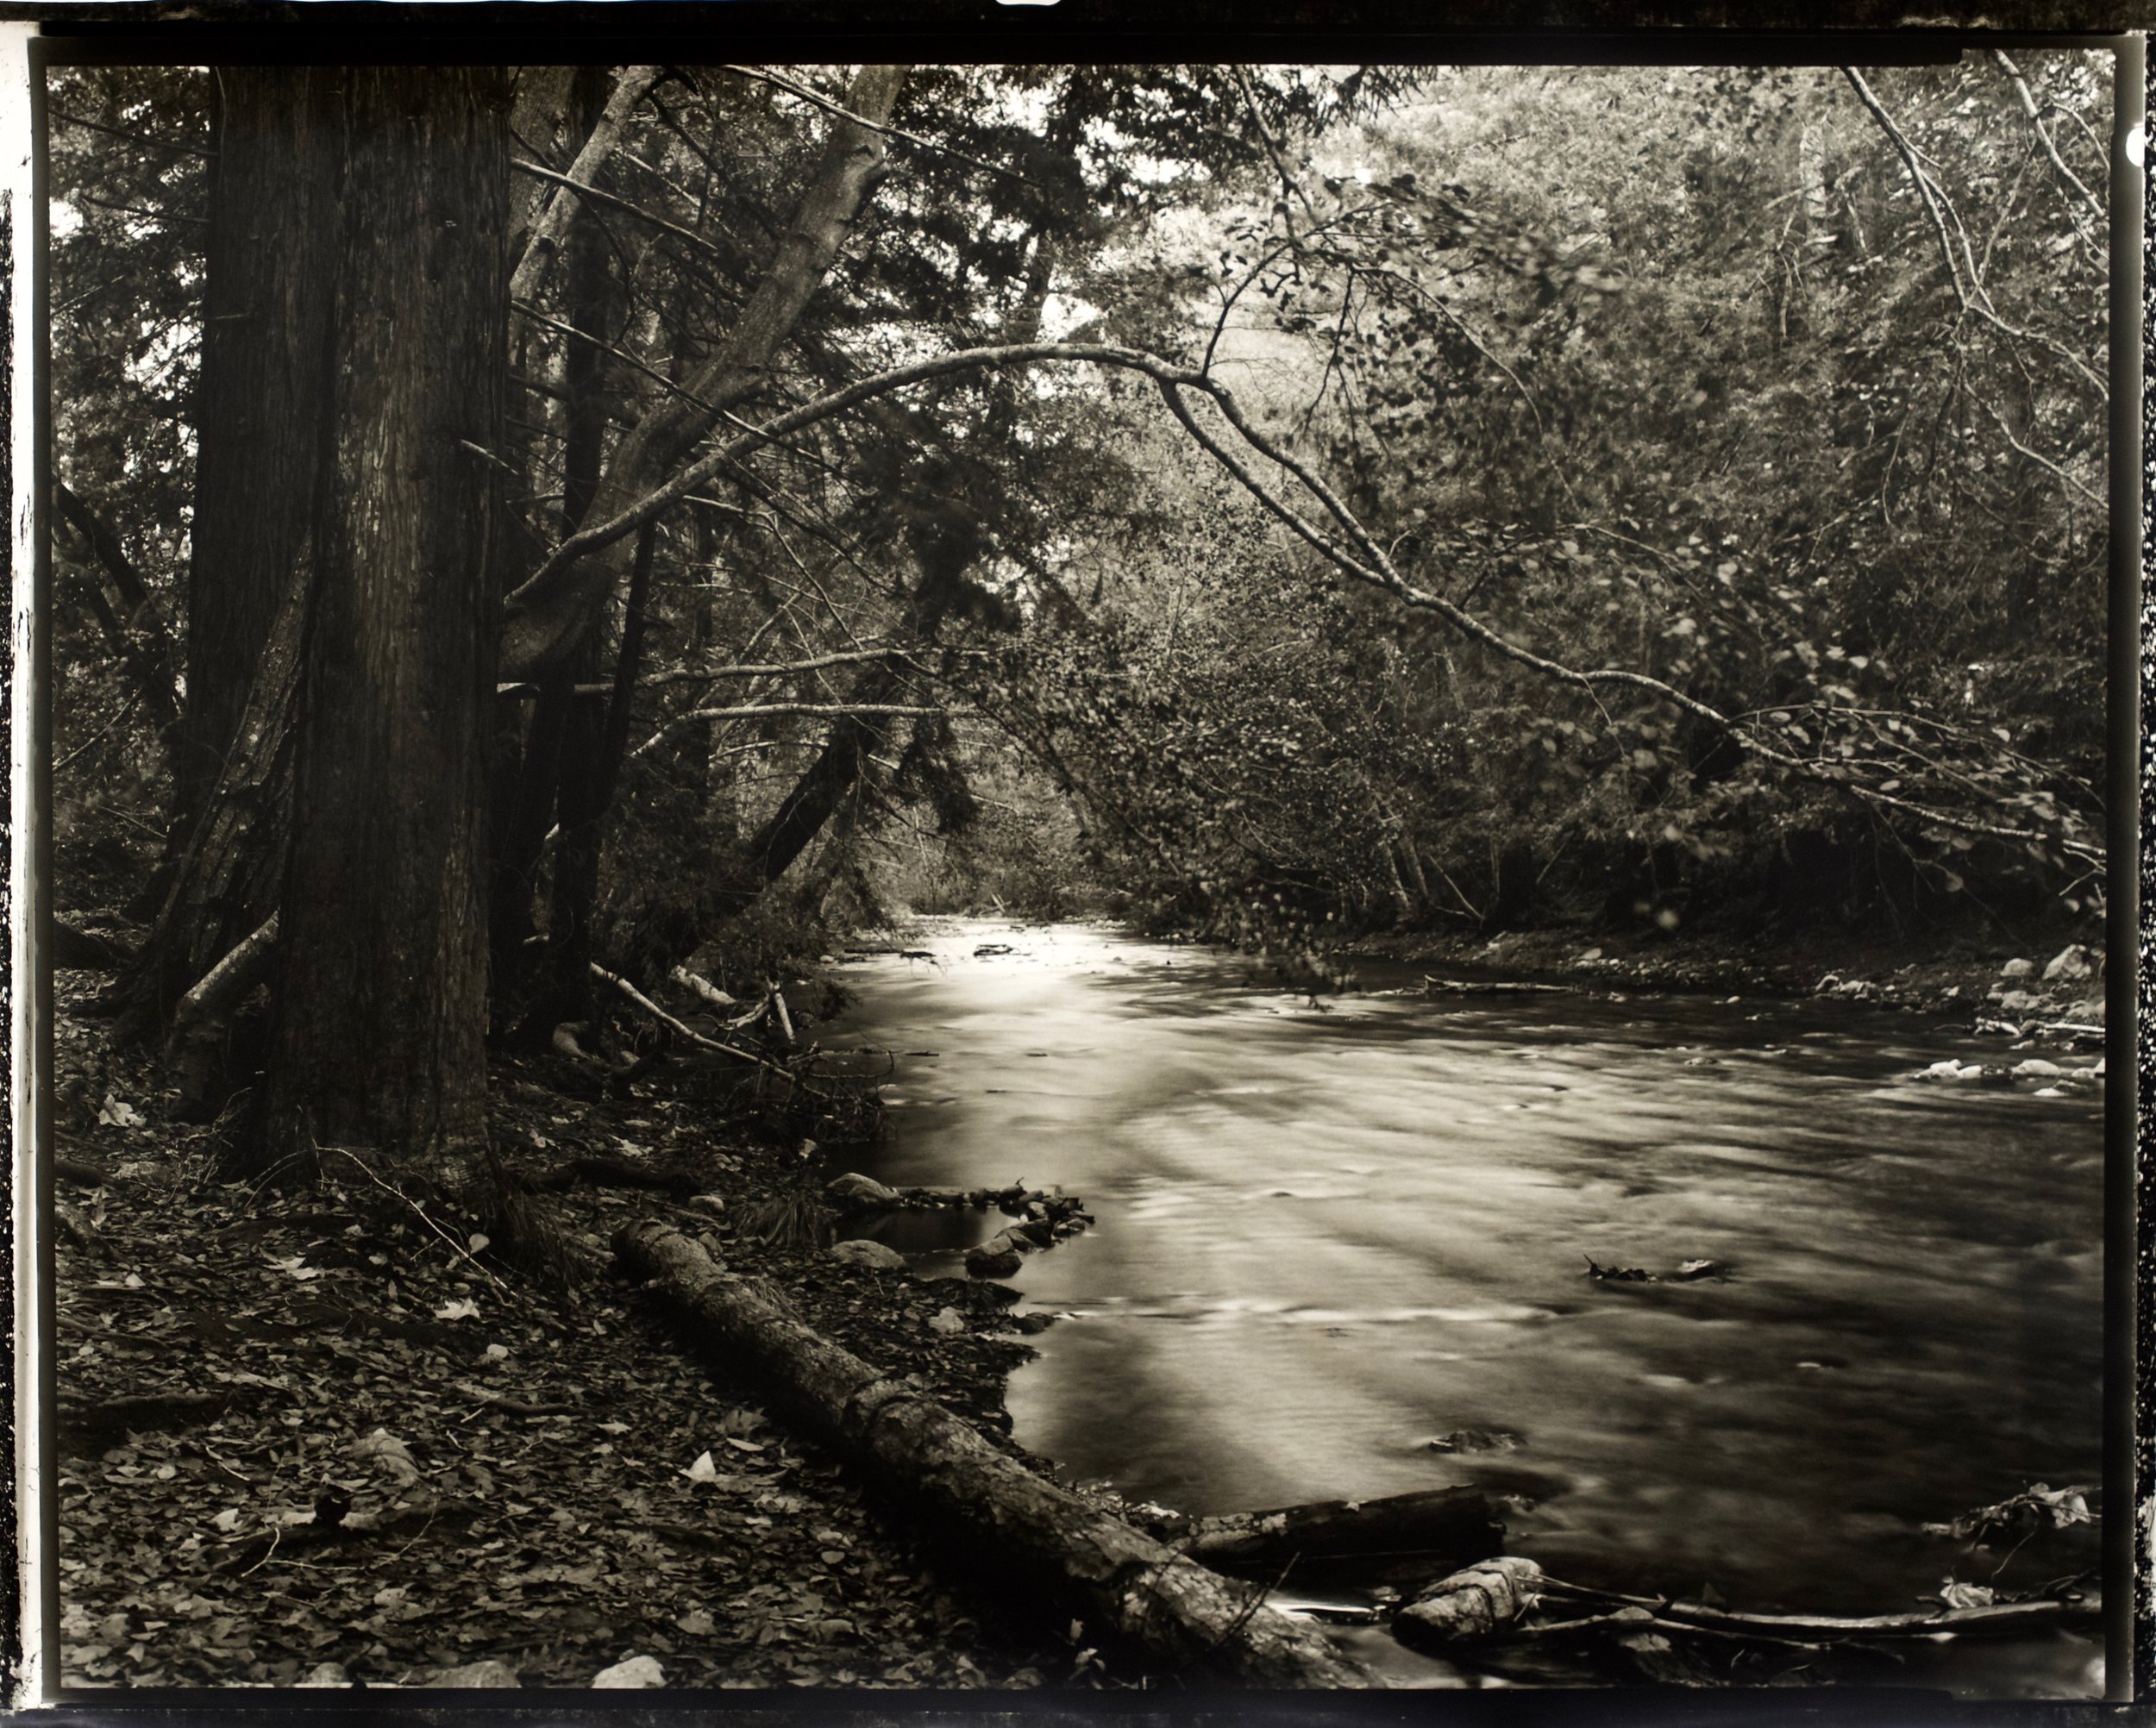 Quiet Water 36 in. x 29 in., hand printed on Fomatone paper, 2018. #2018-15.jpg